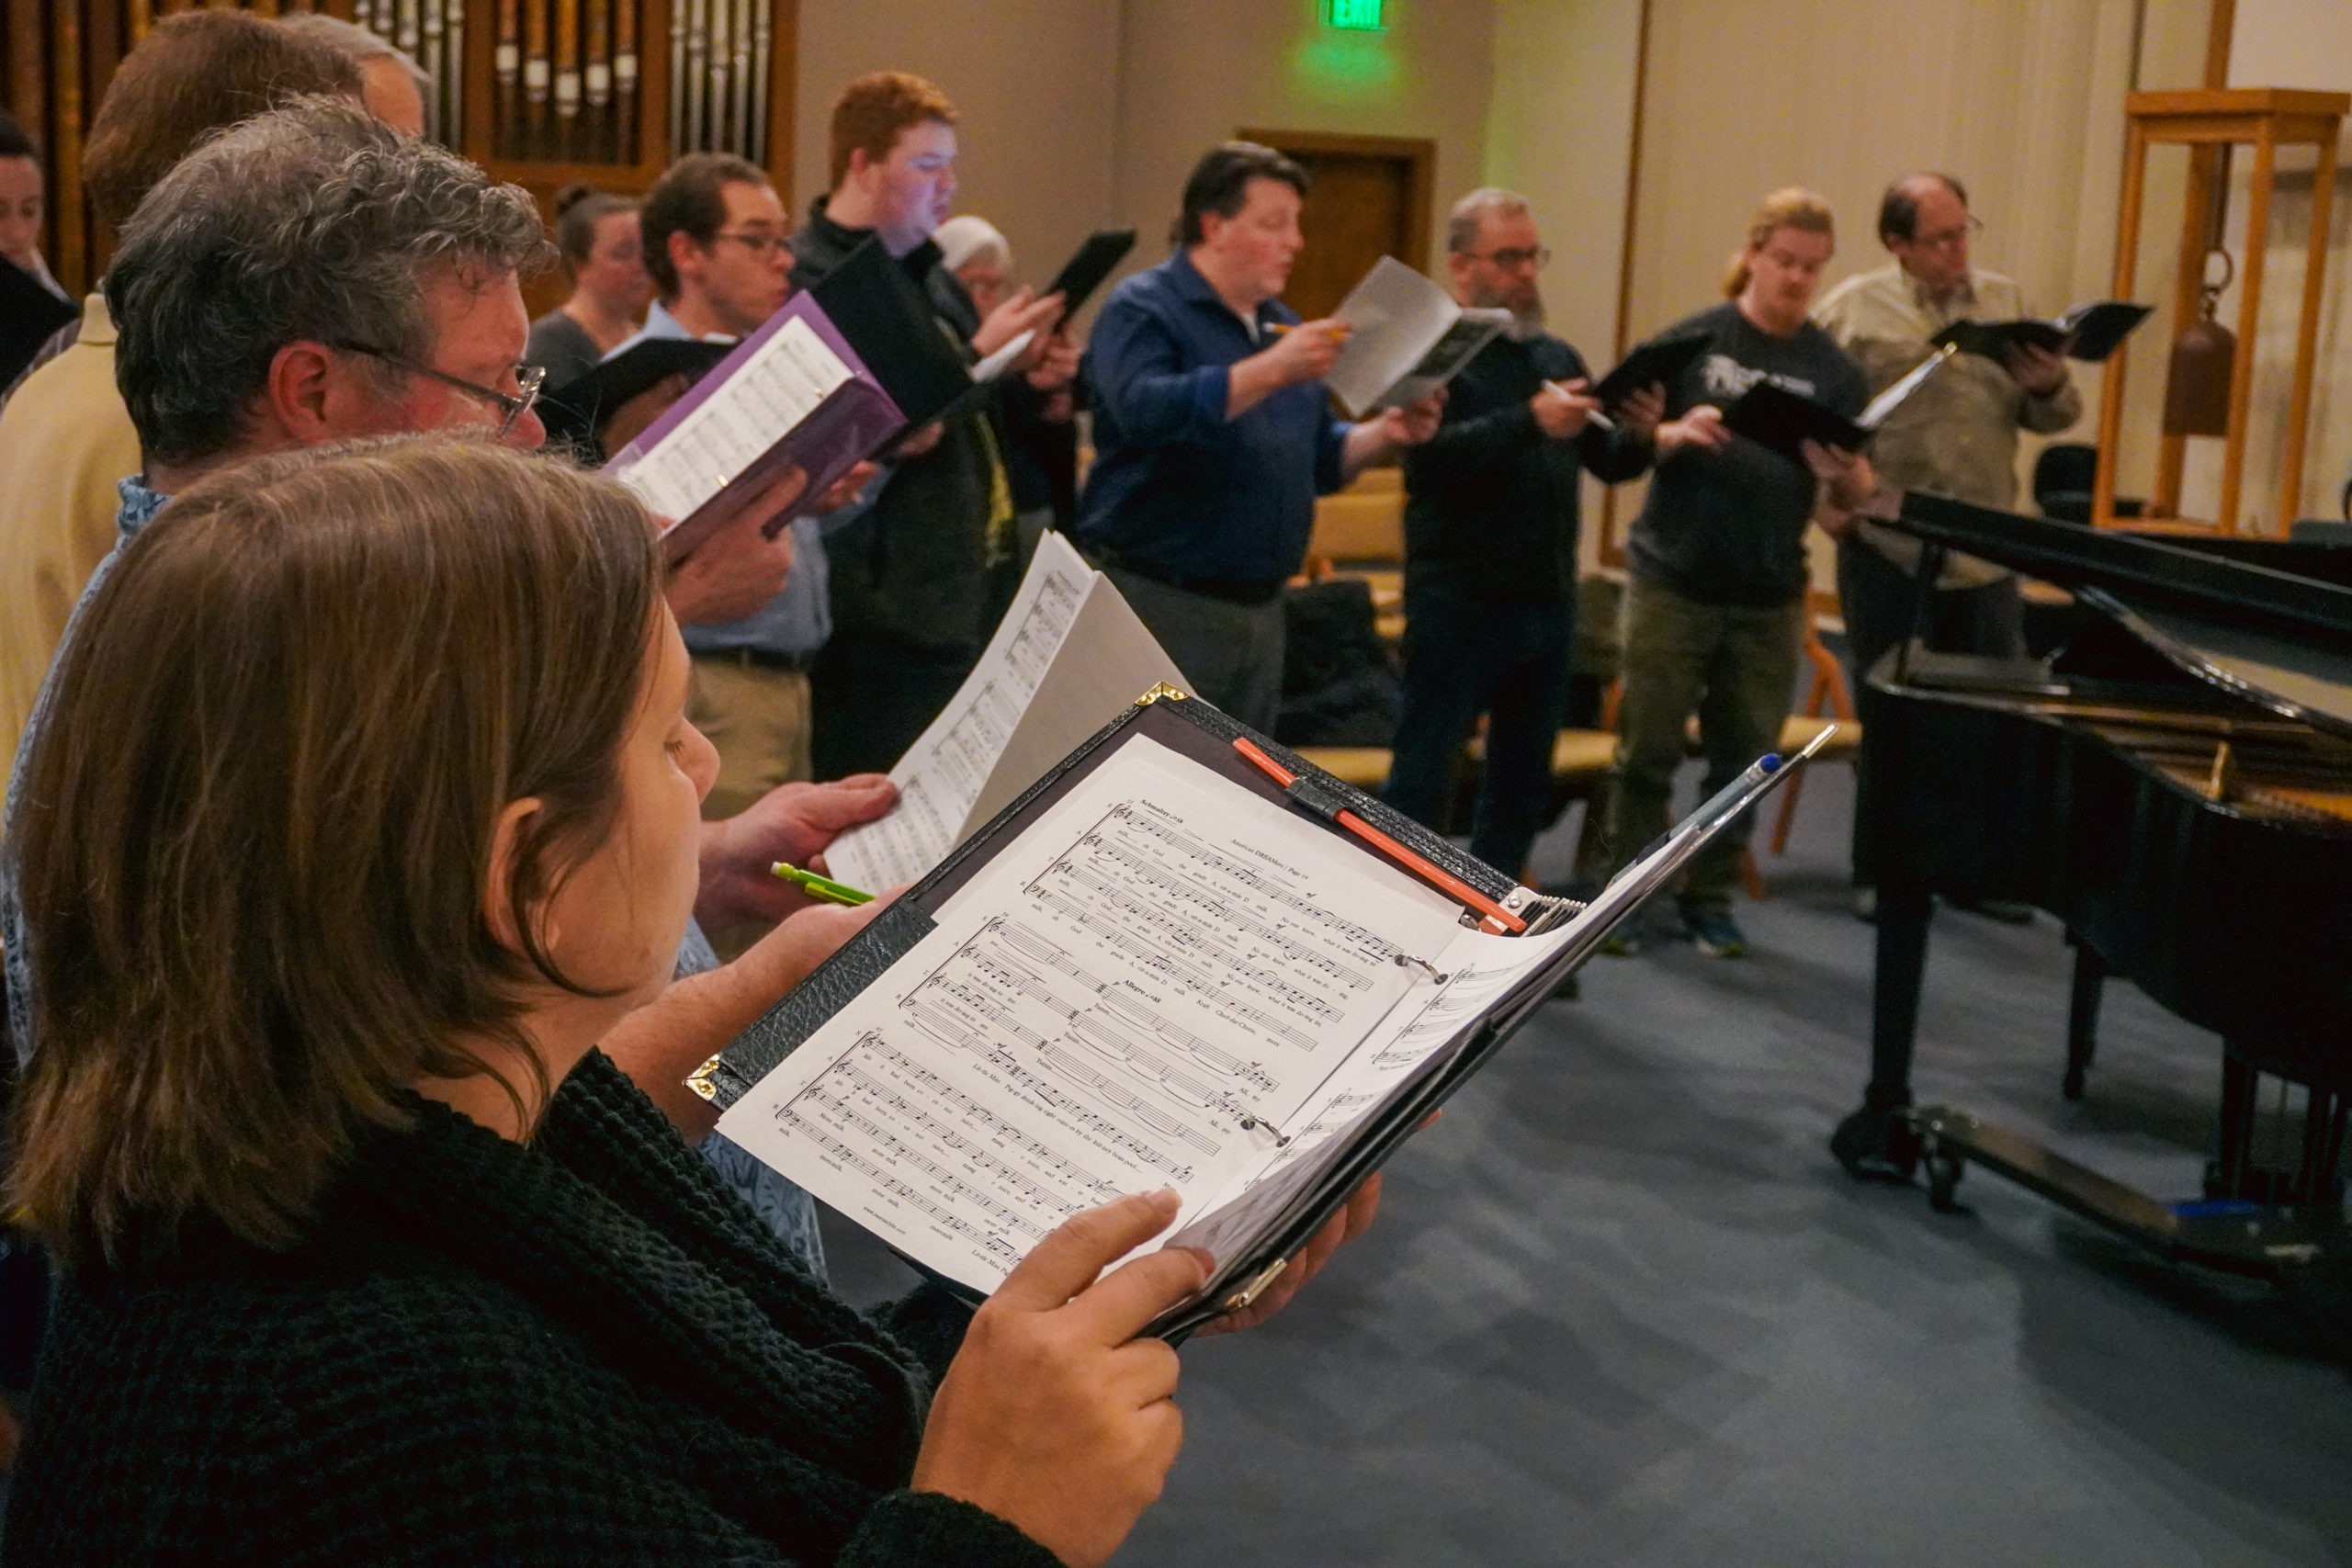 The Mid-Columbia Mastersingers will hold three performances of “American Dreamers,” a presentation of work written by composers who are also immigrants to the U.S., on January 10, 11 and 12. CREDIT: Enrique Pérez de la Rosa/NWPB